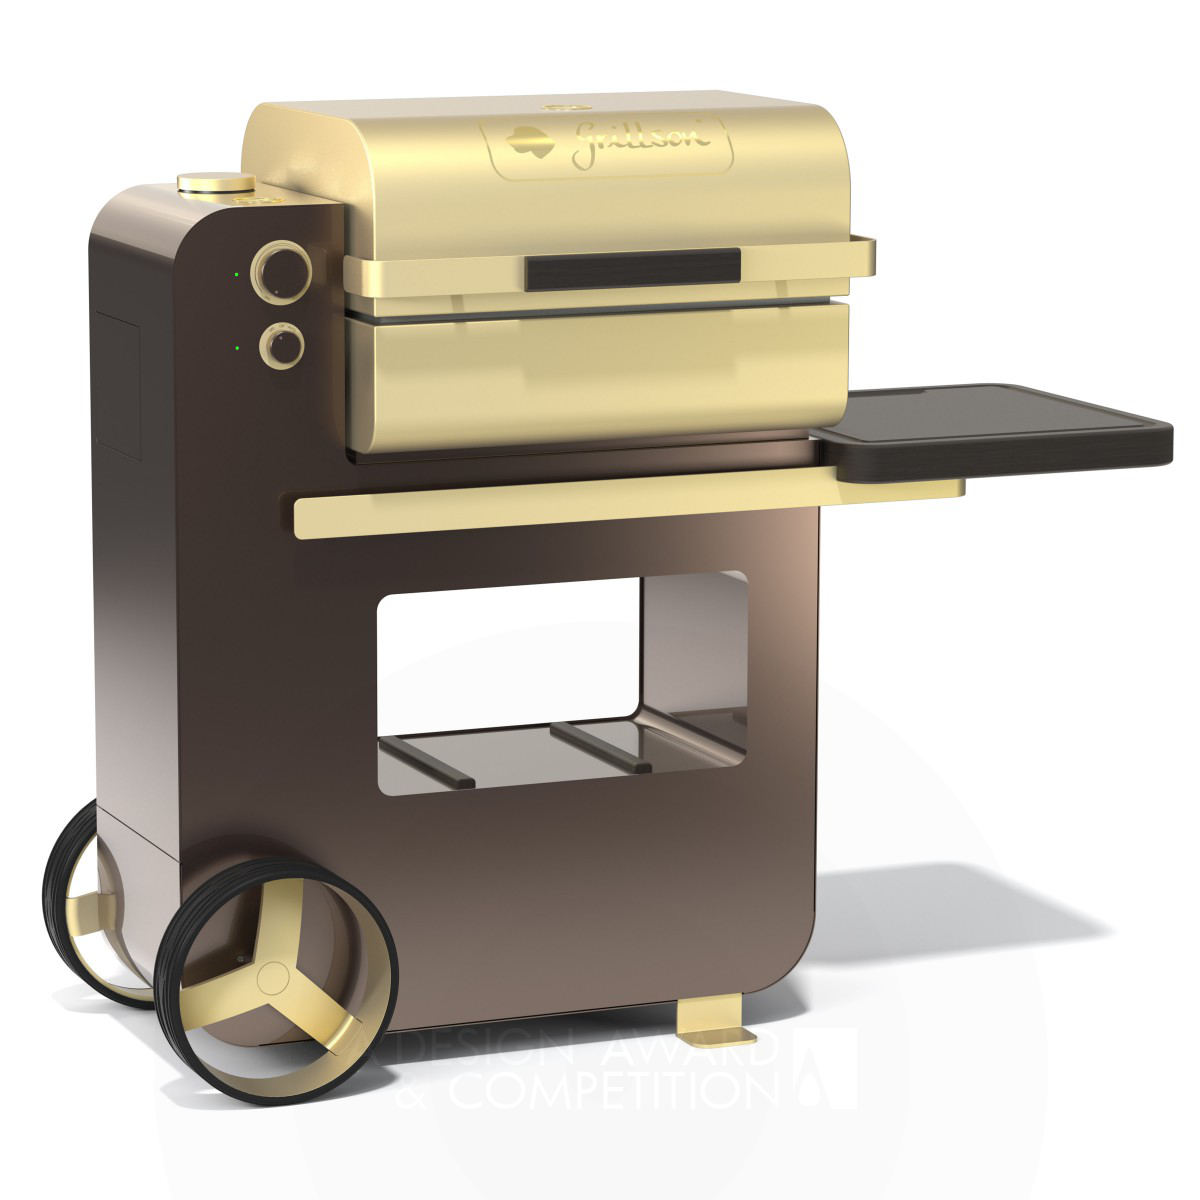 Bob Grillson Wood Pellet Barbecue Grill by Grillson GmbH